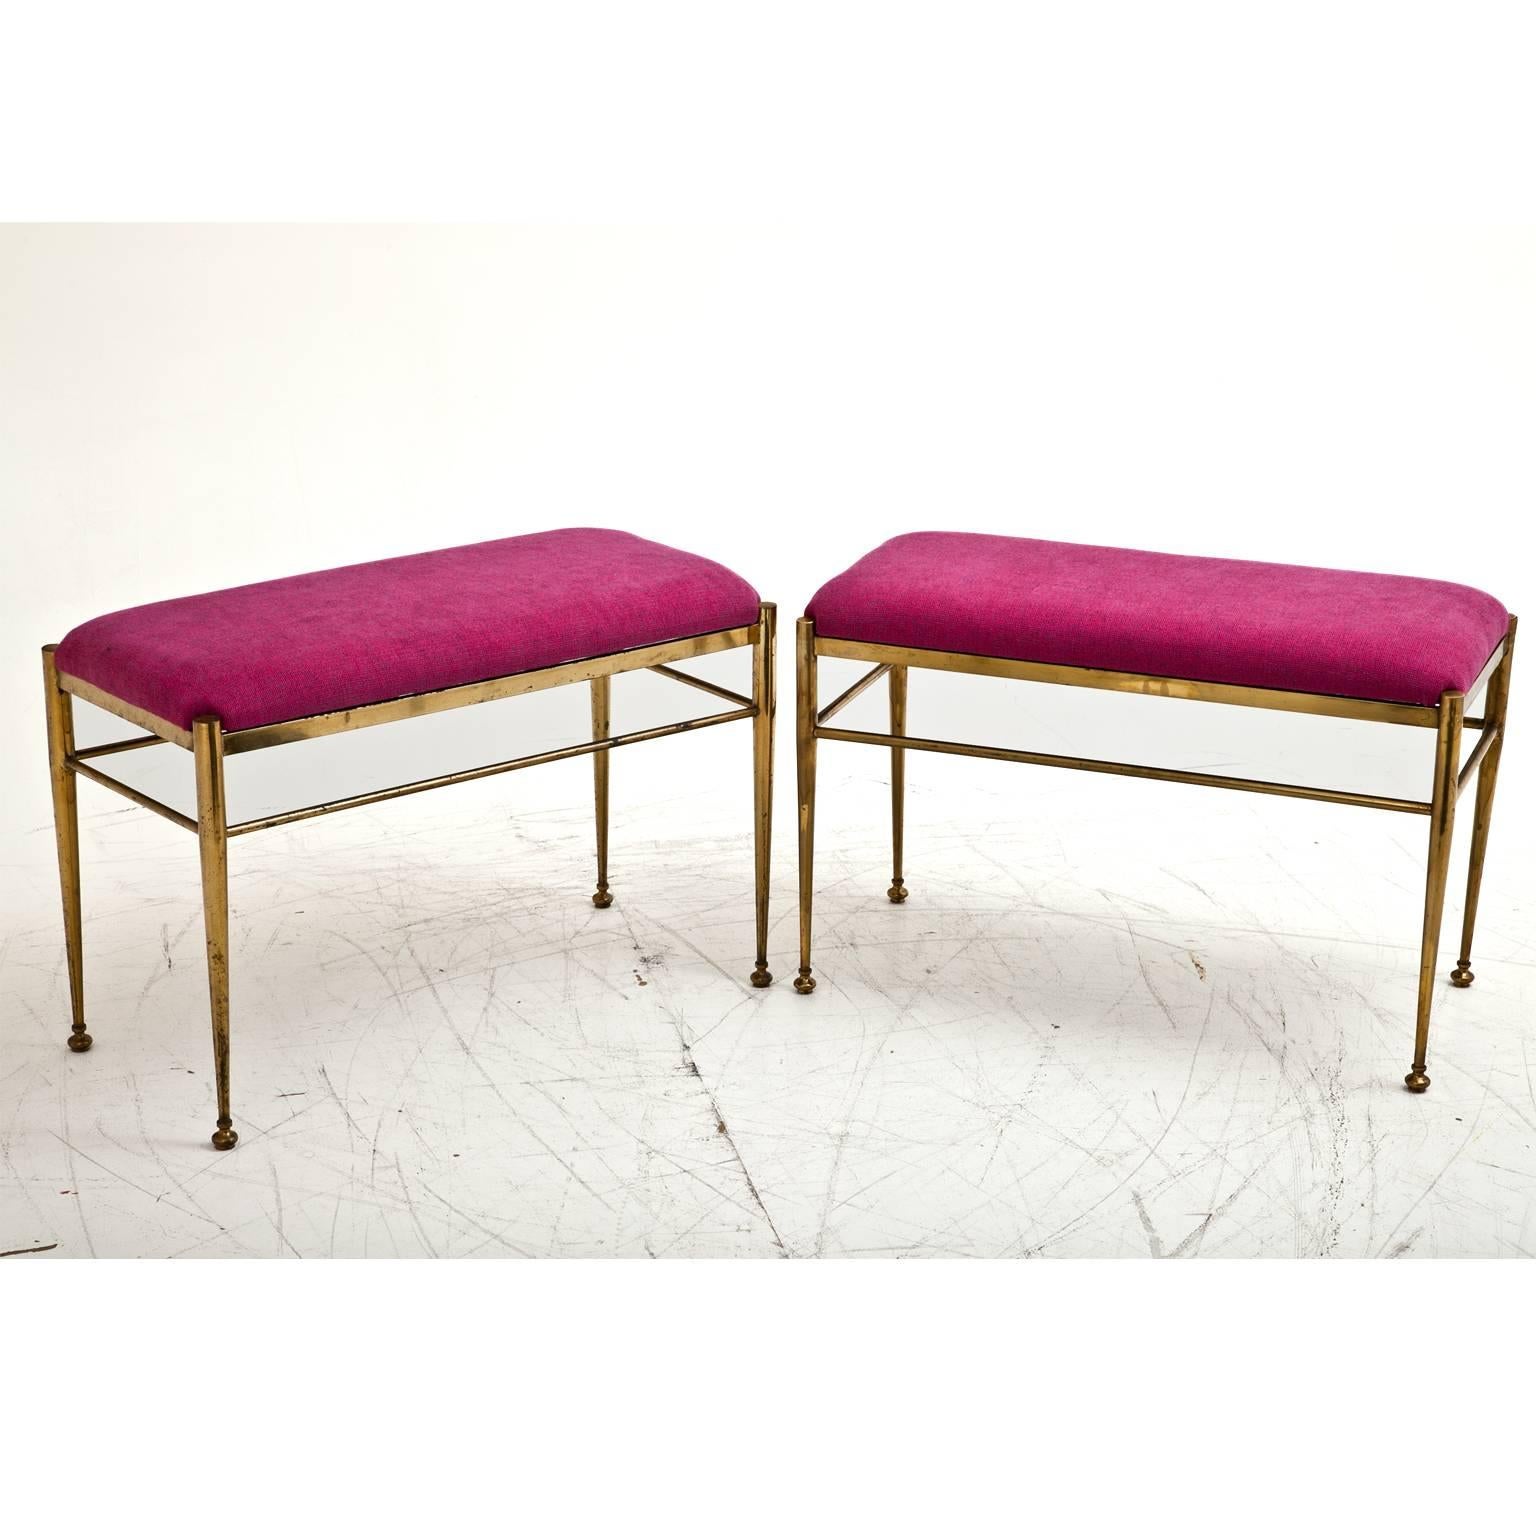 Pair of small benches on tapered brass feet. The benches are reupholstered with a high quality fabric.